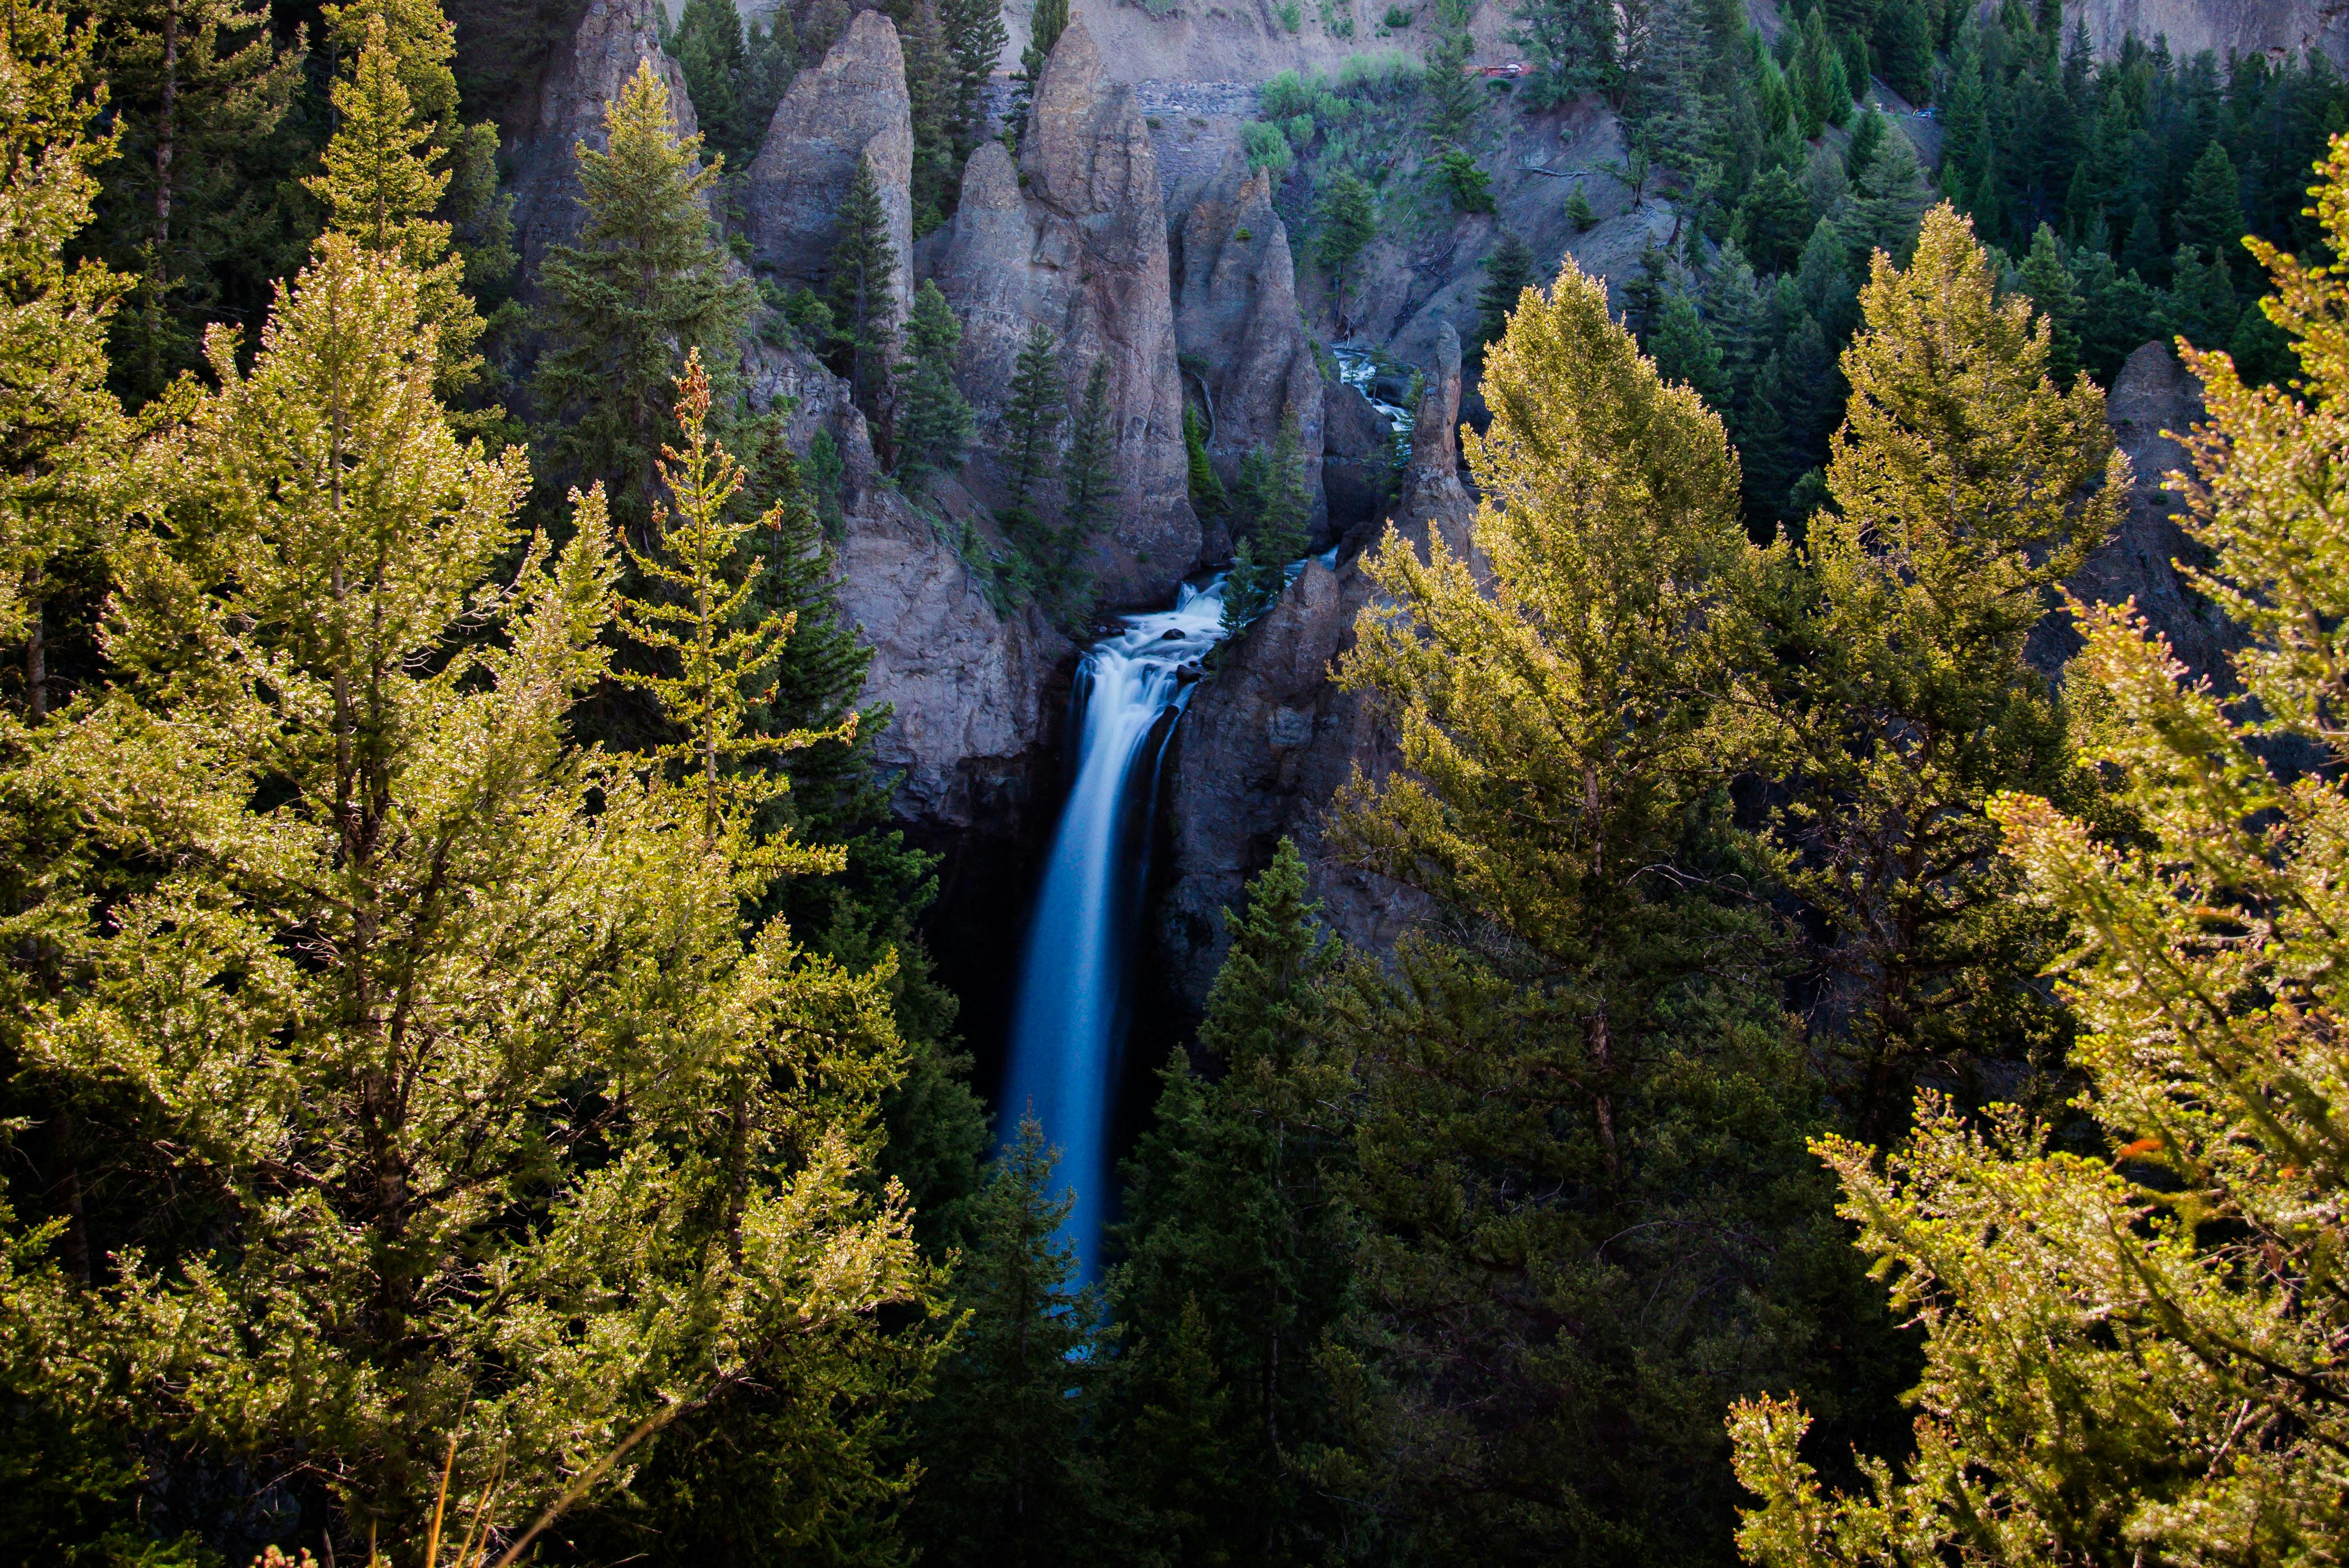 An upper view of Tower Falls